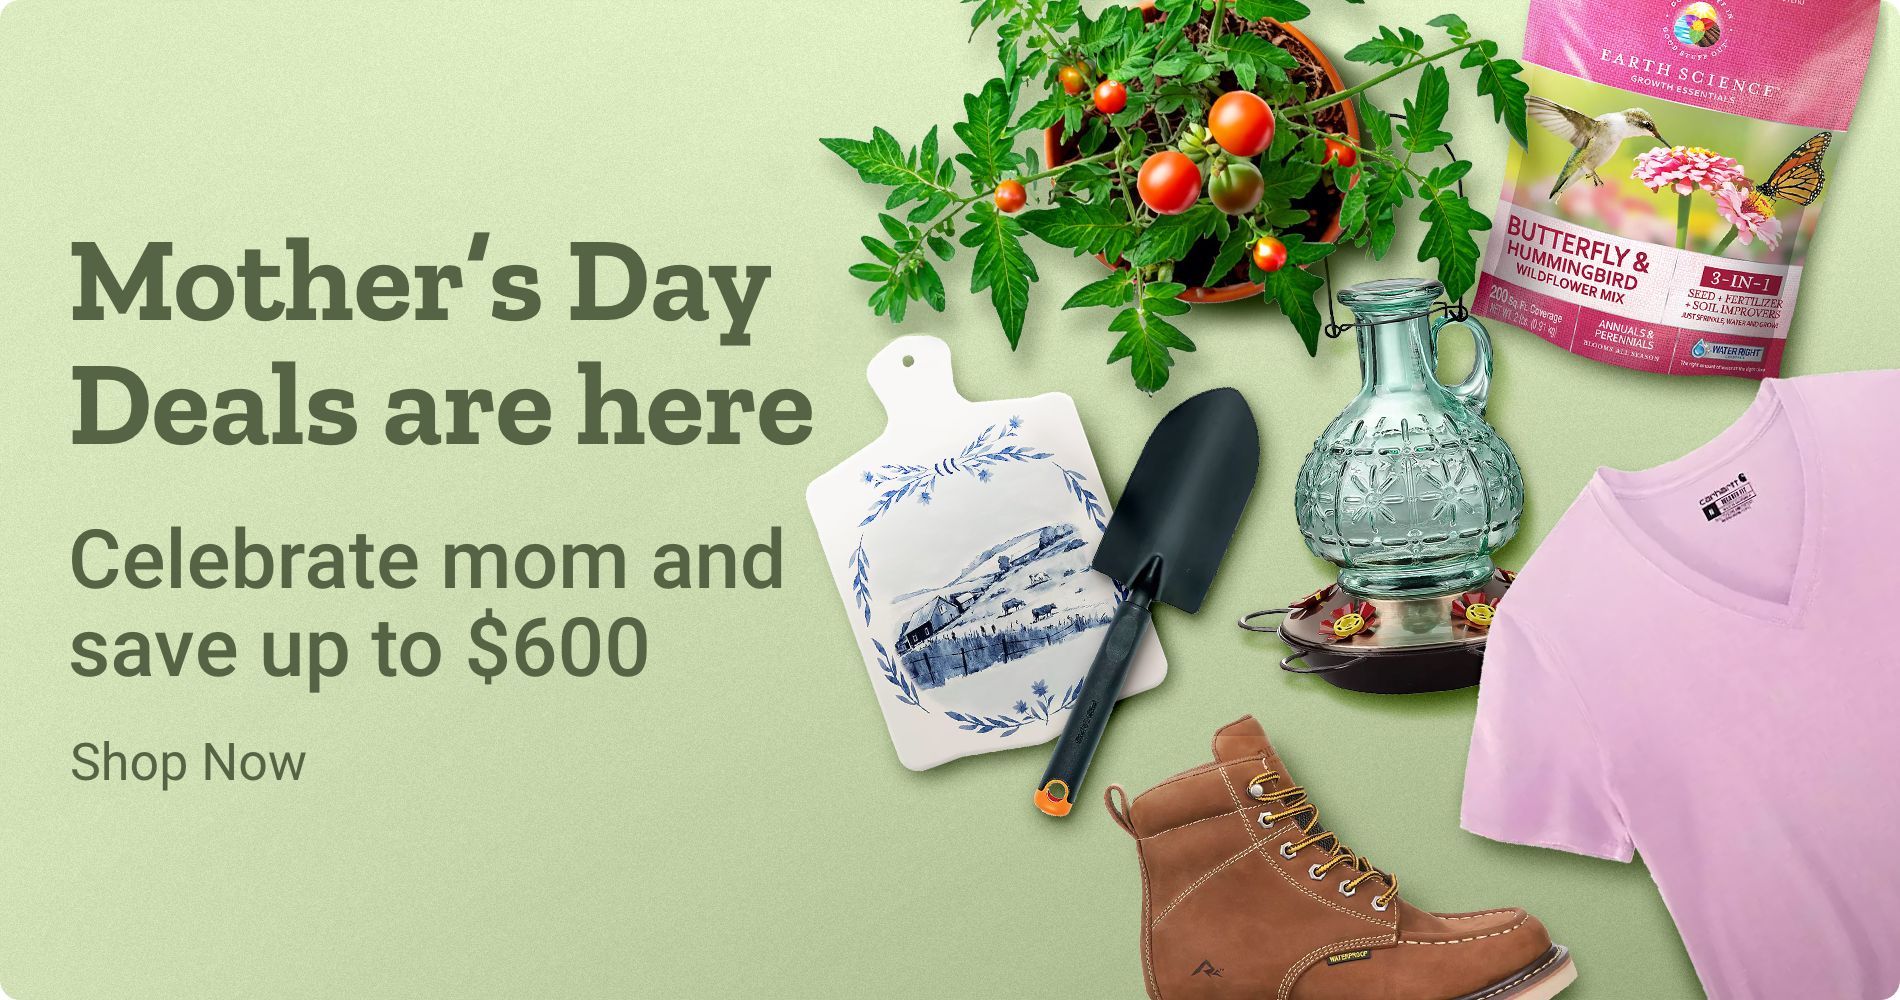 Mother's Day Deals - Celebrate moms who make every day brighter